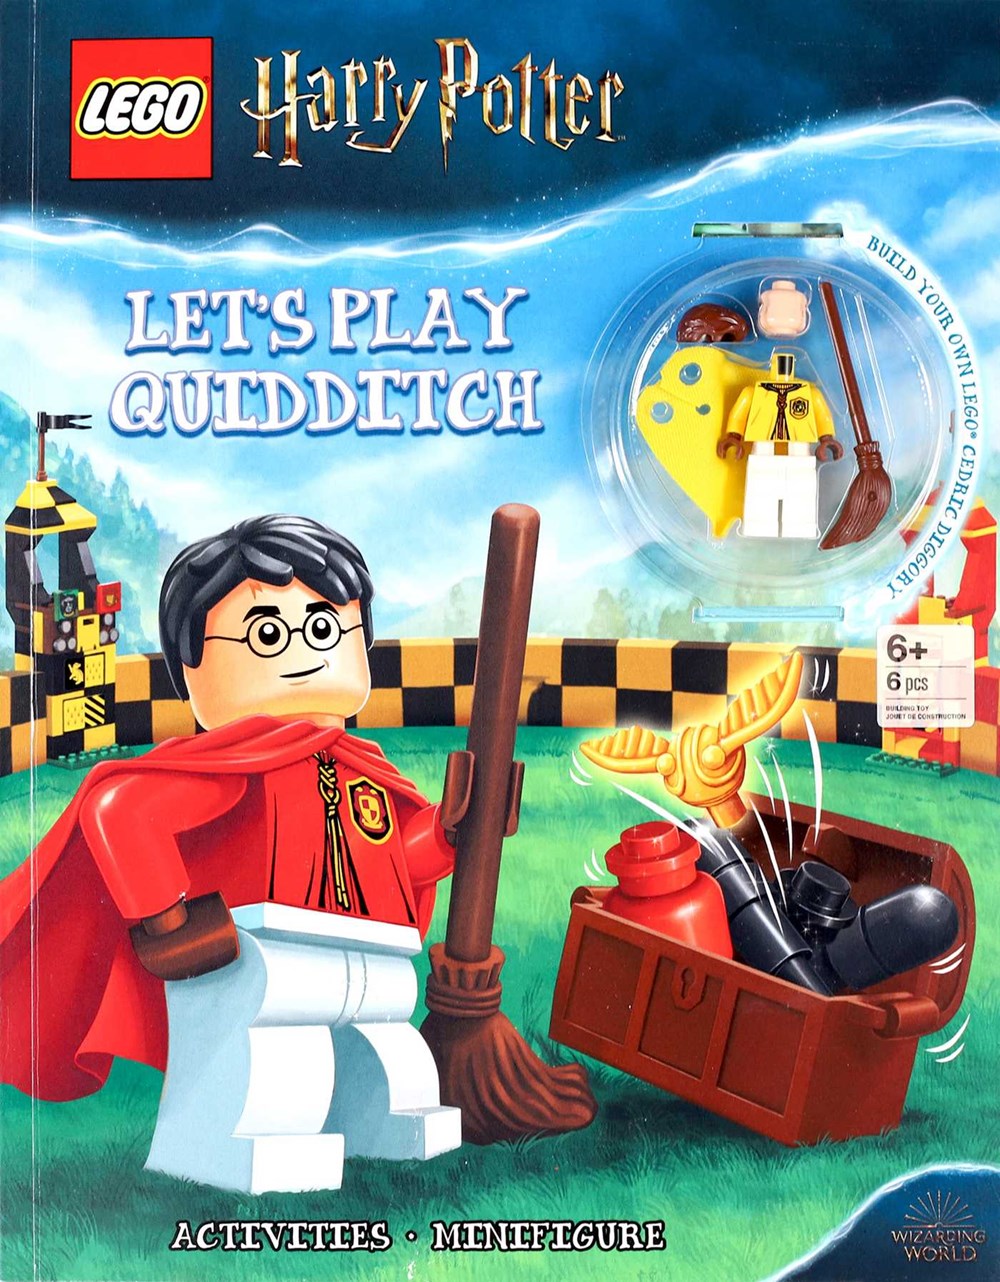 LEGO© Harry Potter™ Let's Play Quidditch! (Activity Book with Minifigure)